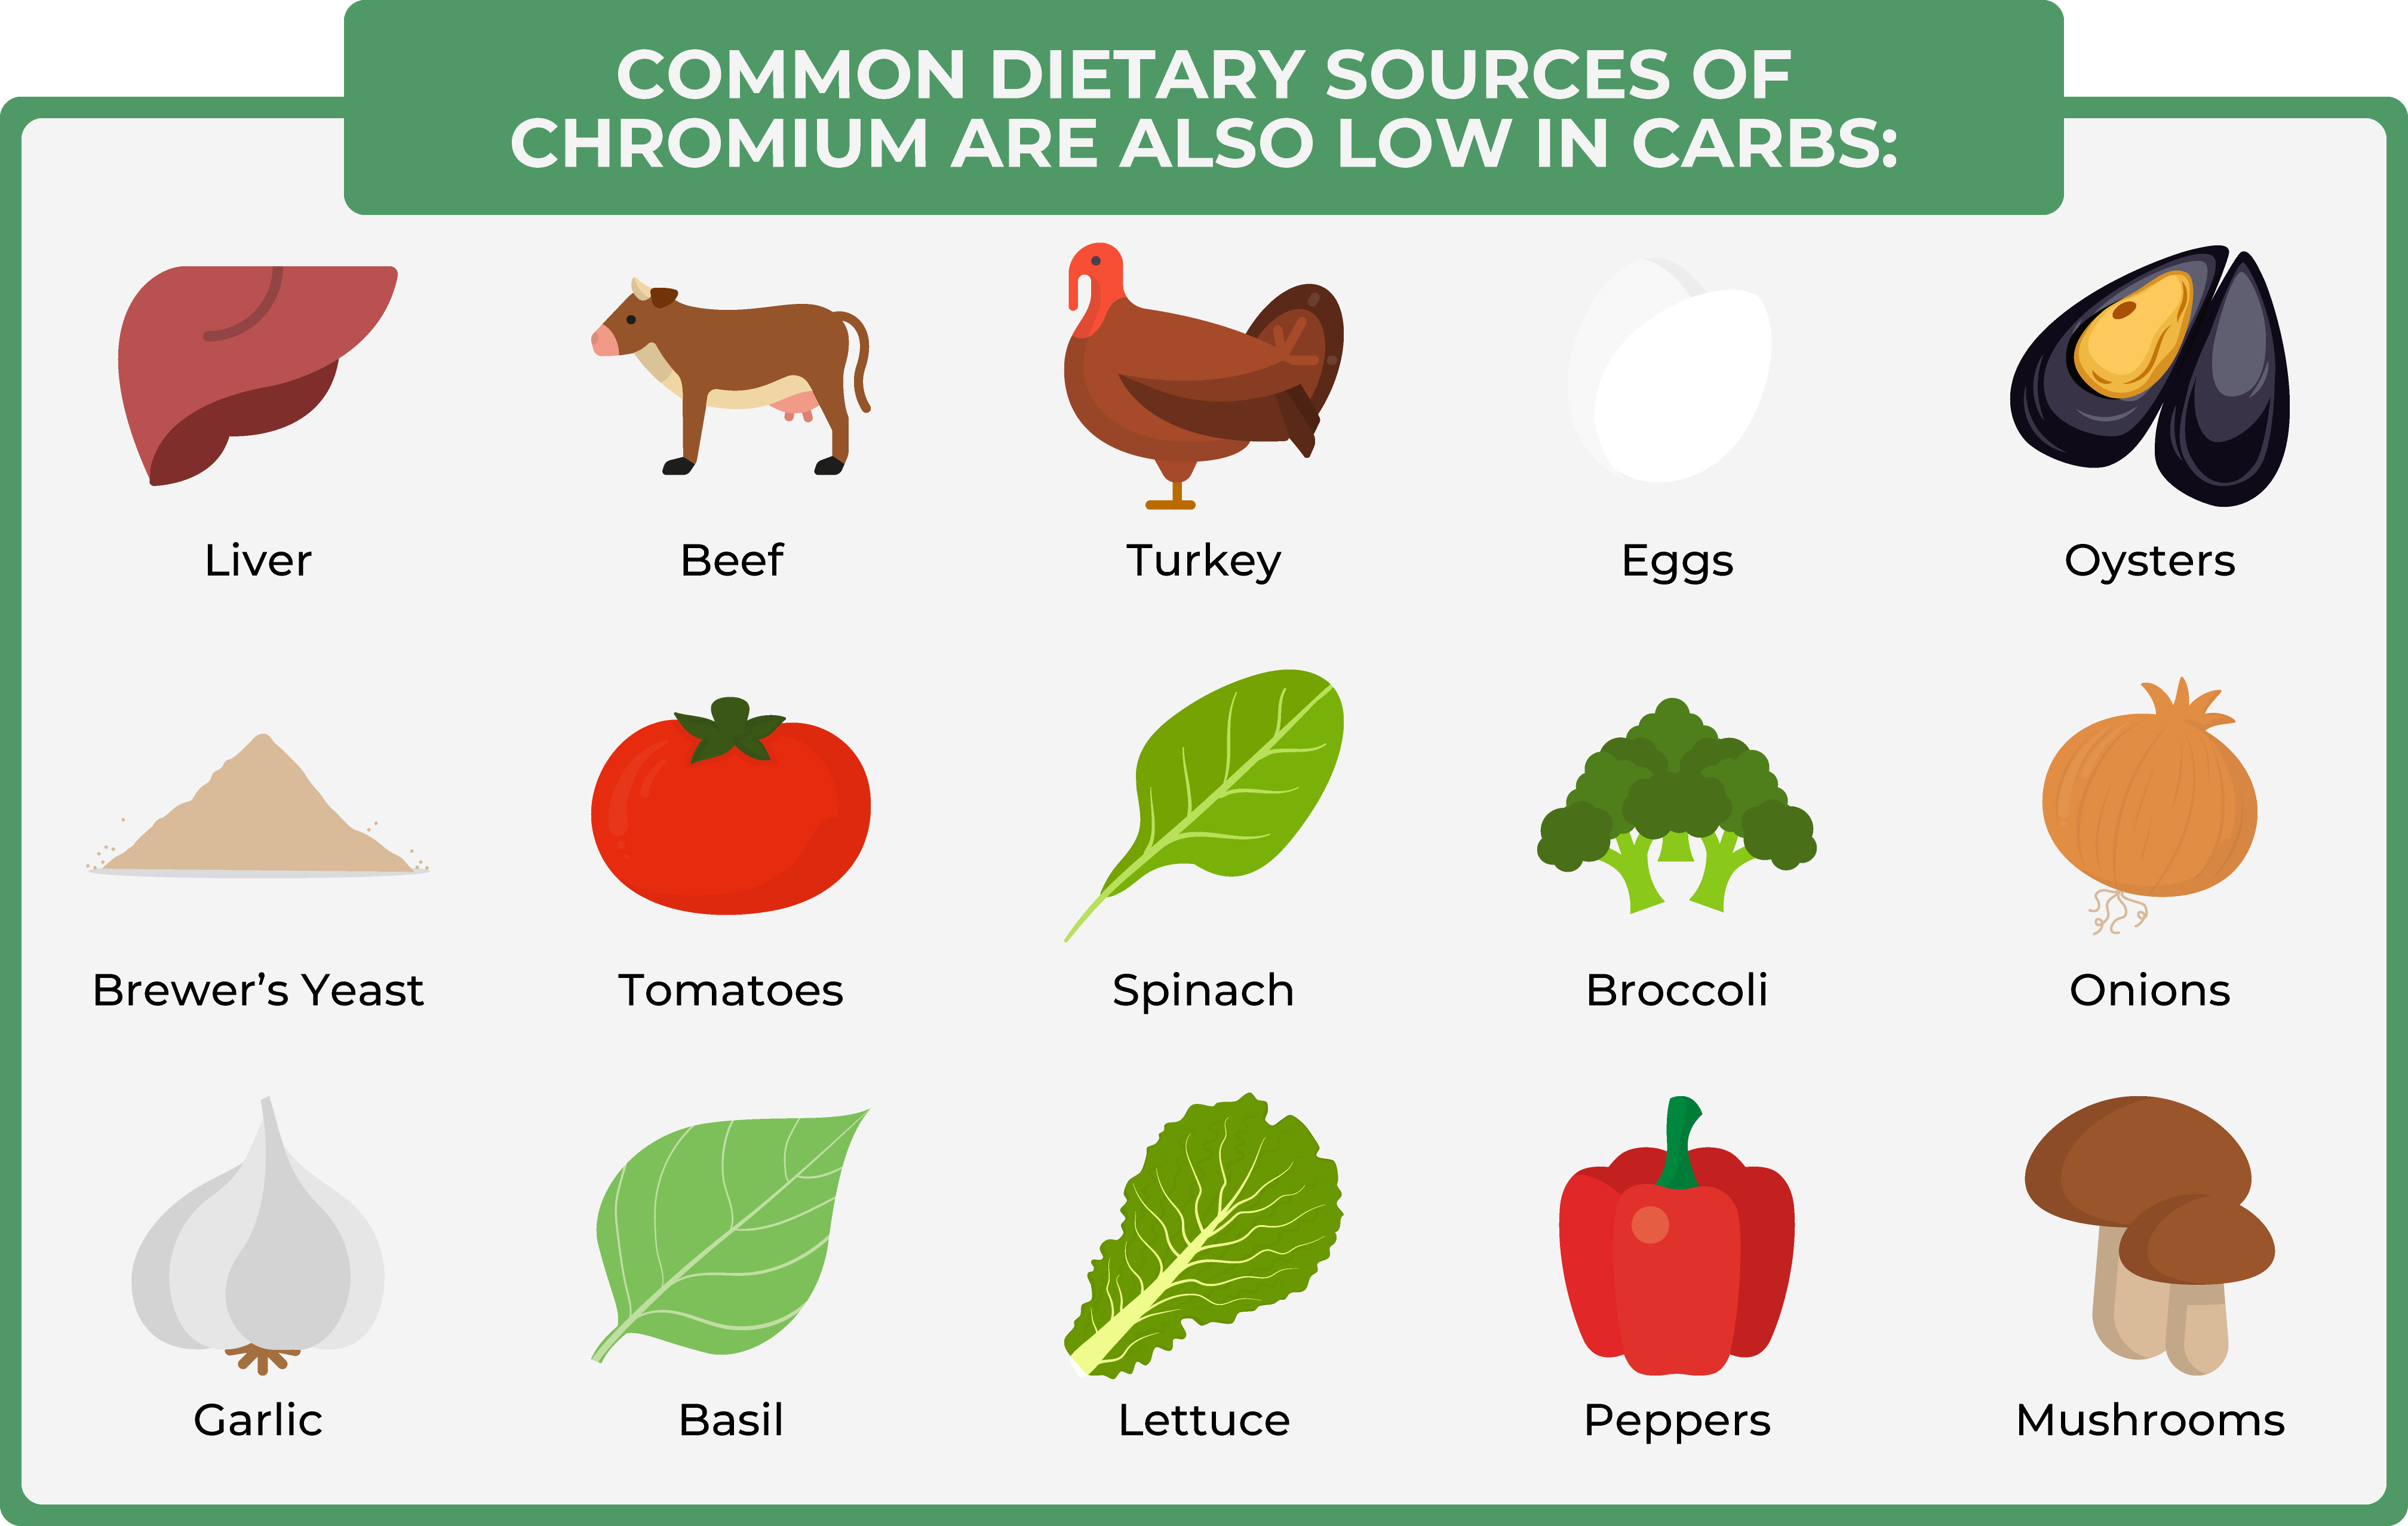 common-dietary-sources-of-chromium-are-also-low-in-carbs.png